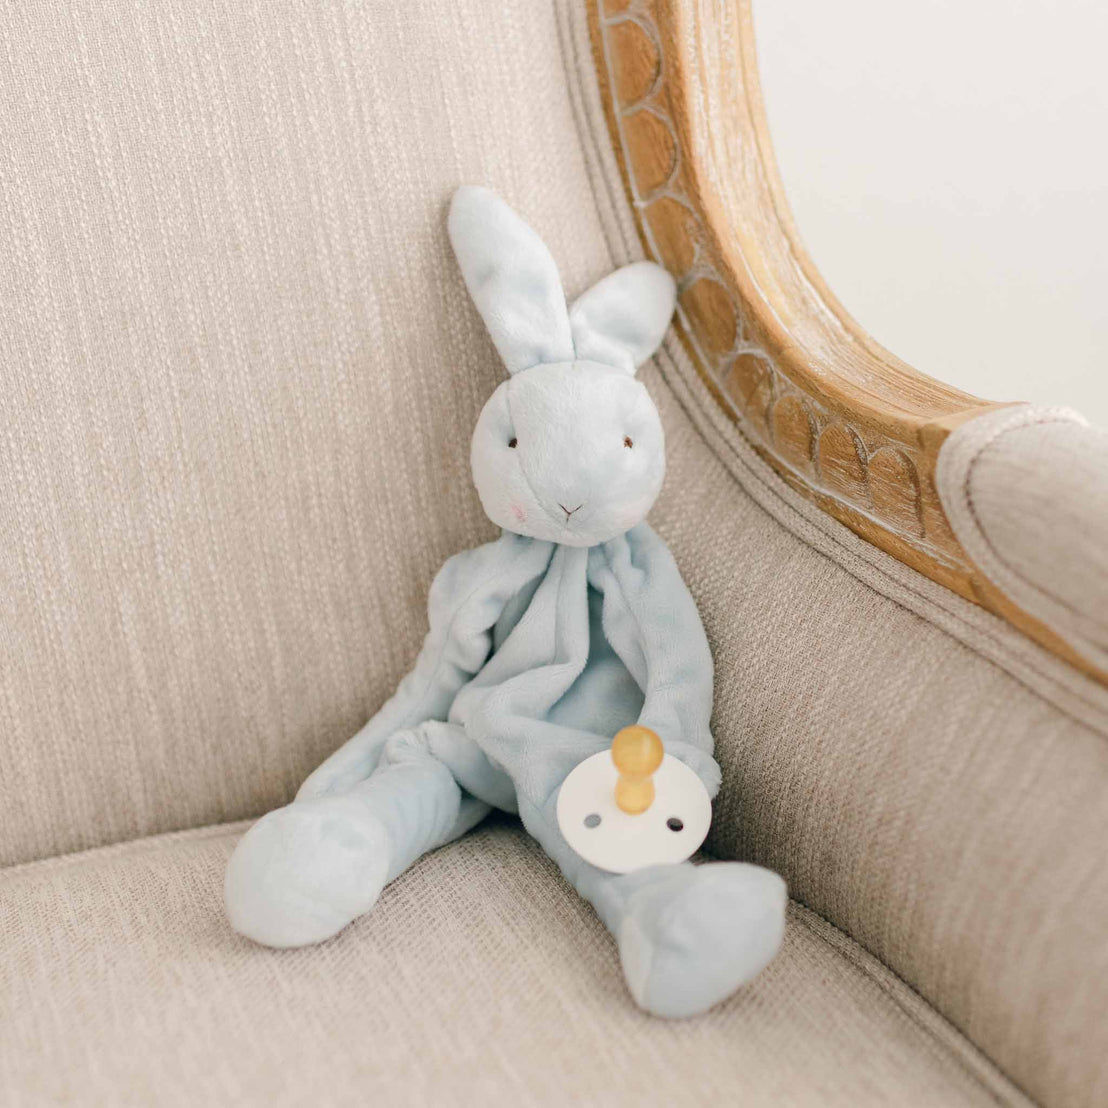 Harrison Silly Bunny Buddy | Pacifier Holder